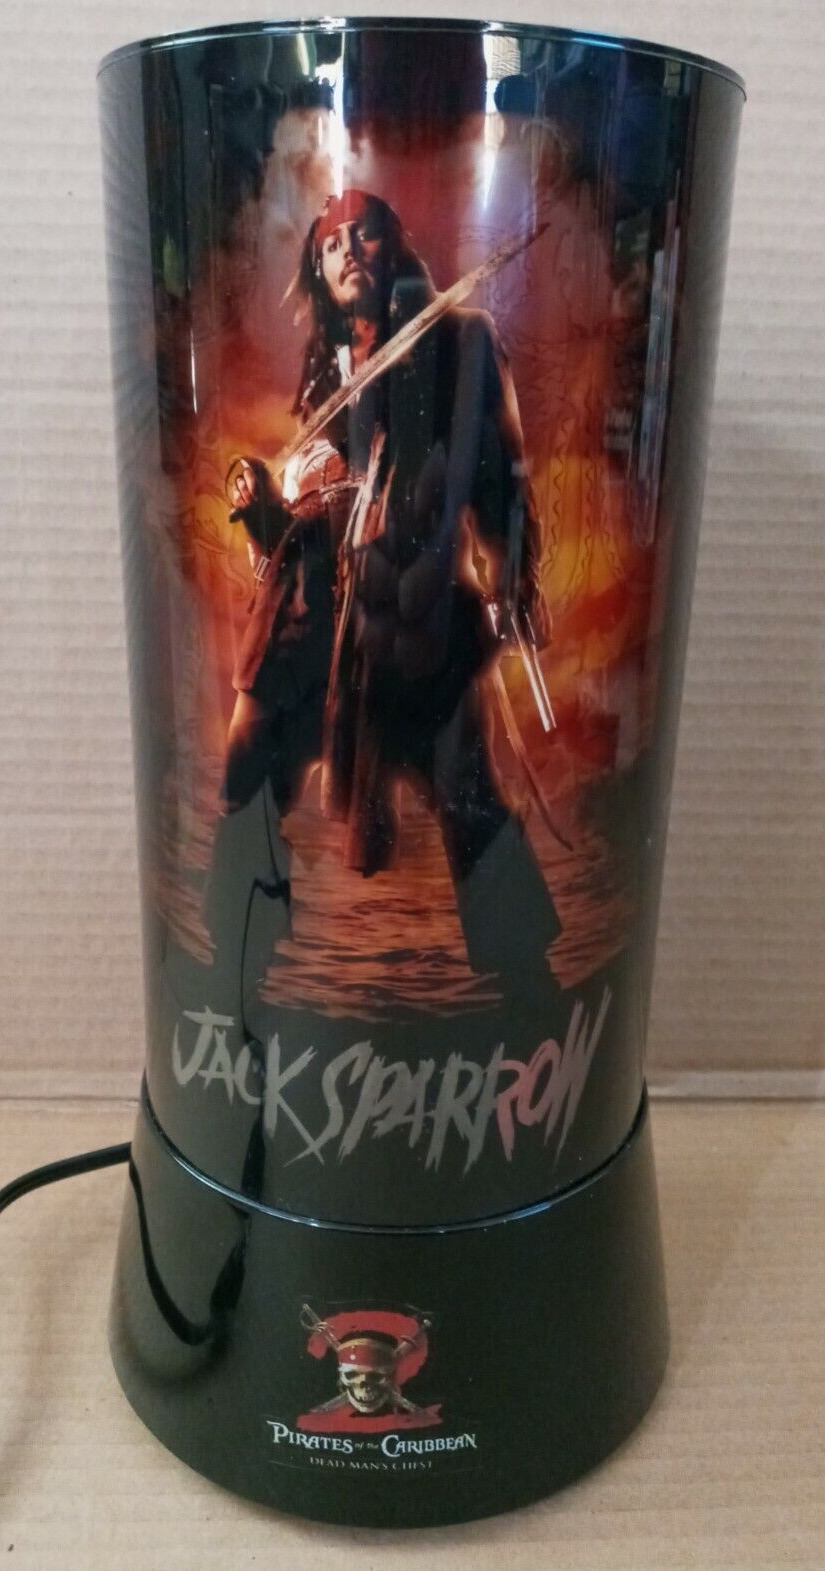 JOHNNY DEPP PIRATES OF THE CARIBBEAN JACK SPARROW MOTION LIGHT LAMP - WORKS